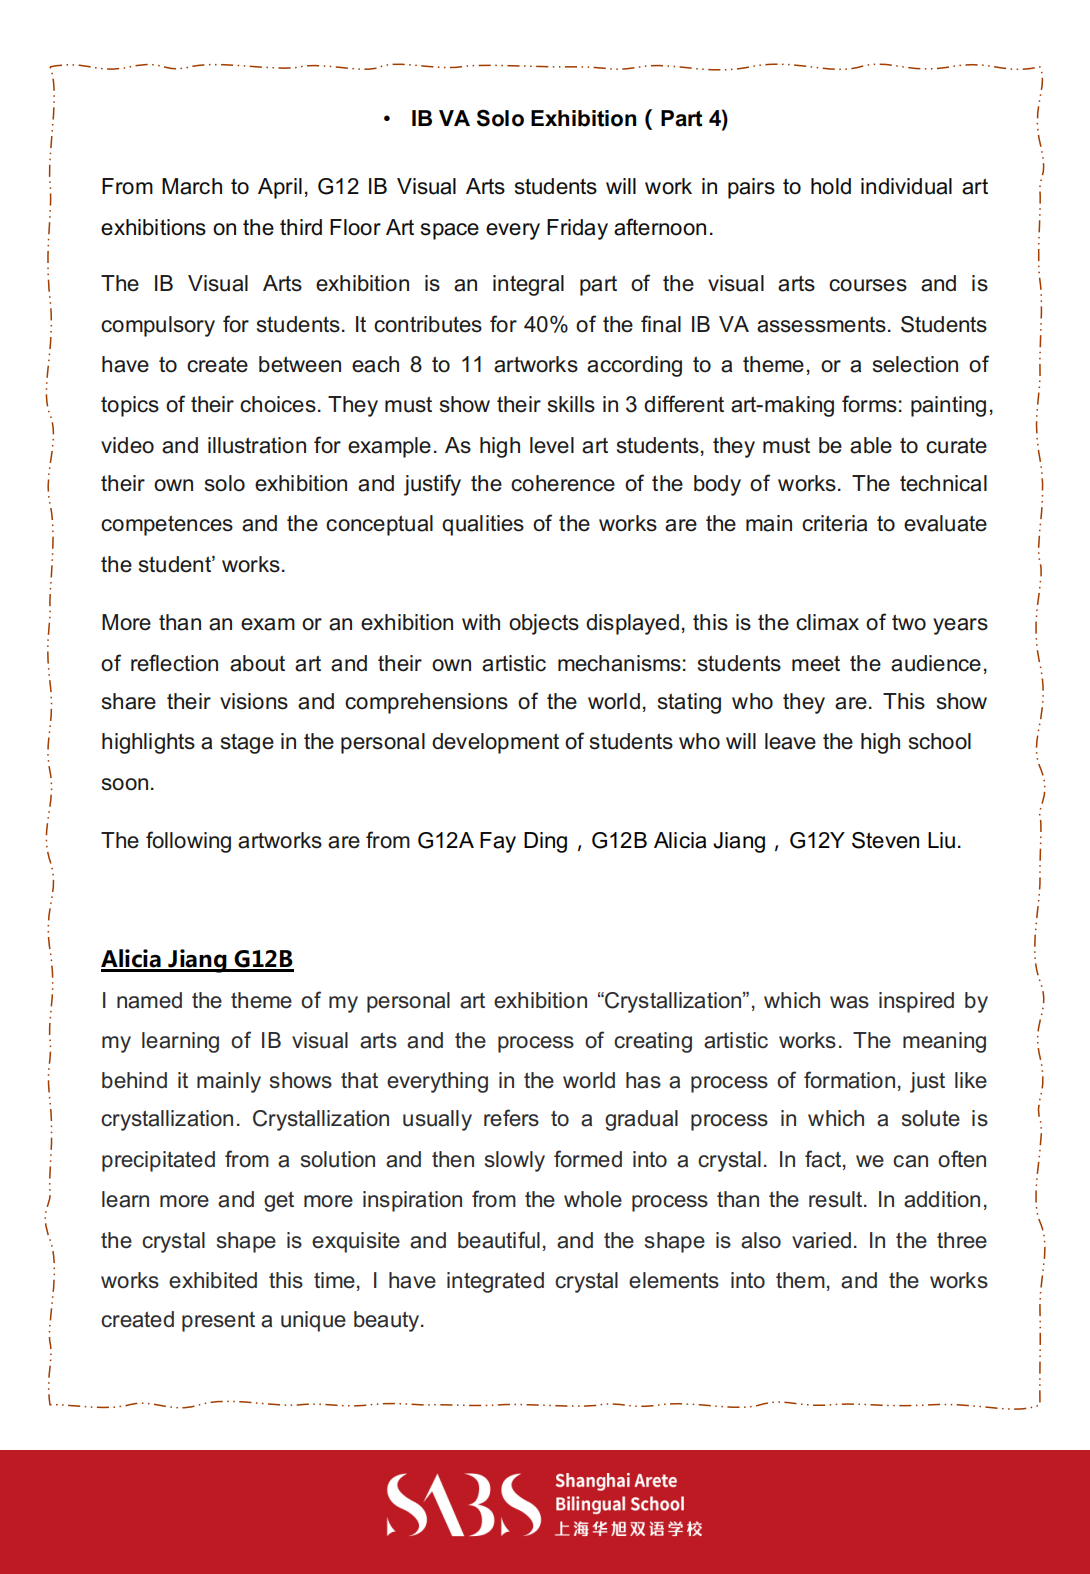 HS 5th Issue Newsletter pptx（English）_07.png